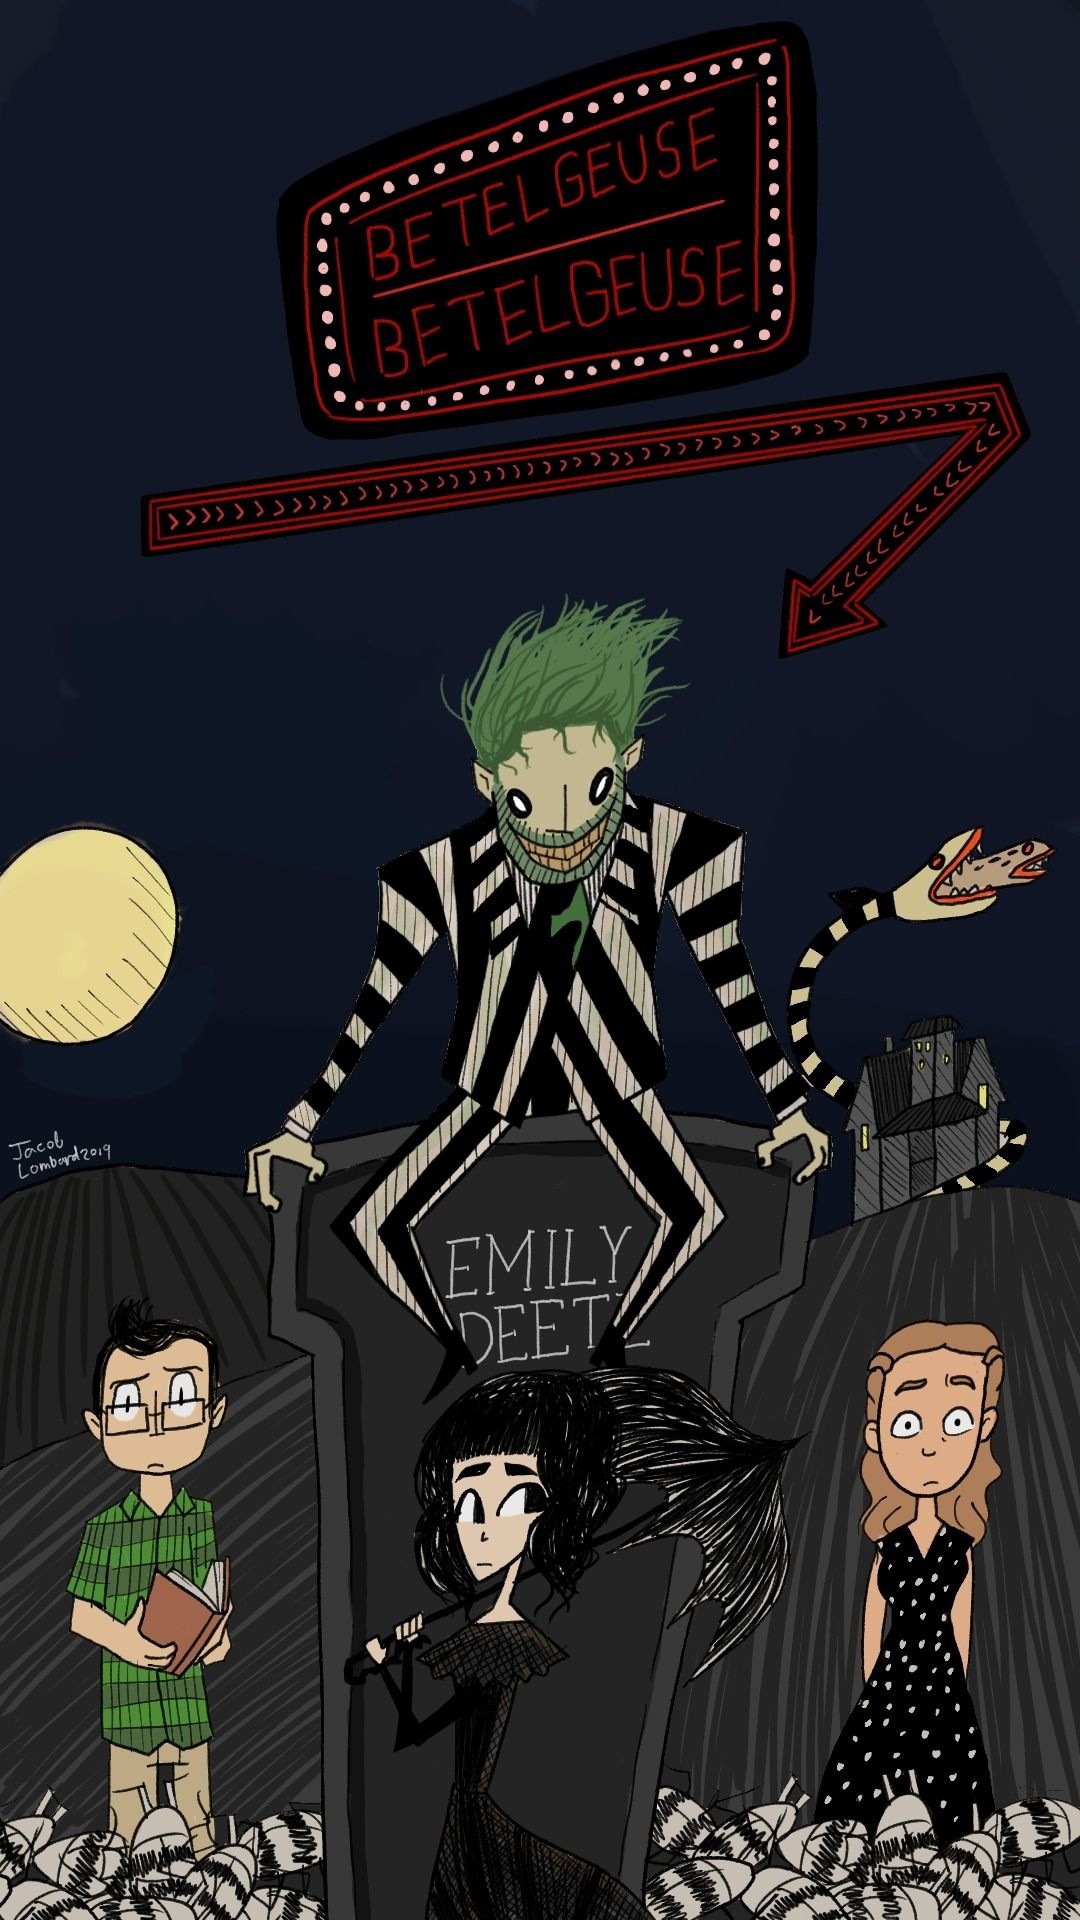 Beetlejuice (Cartoon): The ghostly con-man and his best friend Lydia, Supernatural adventures. 1080x1920 Full HD Background.